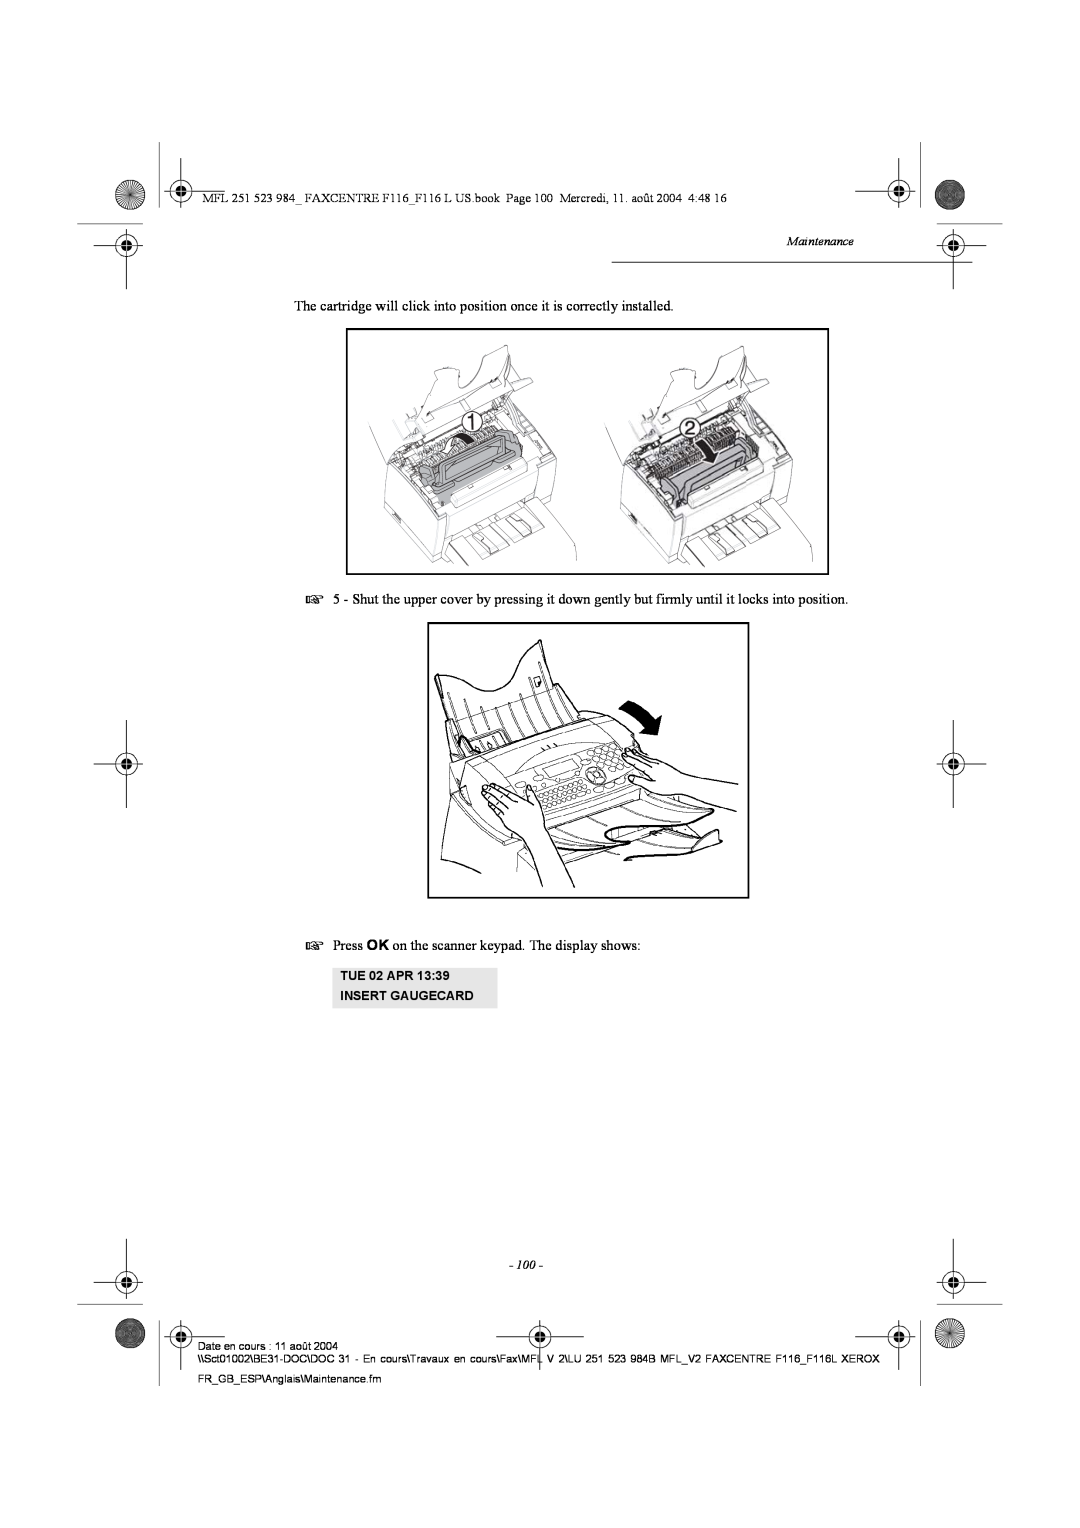 Xerox F116 user manual Press OK on the scanner keypad. The display shows 